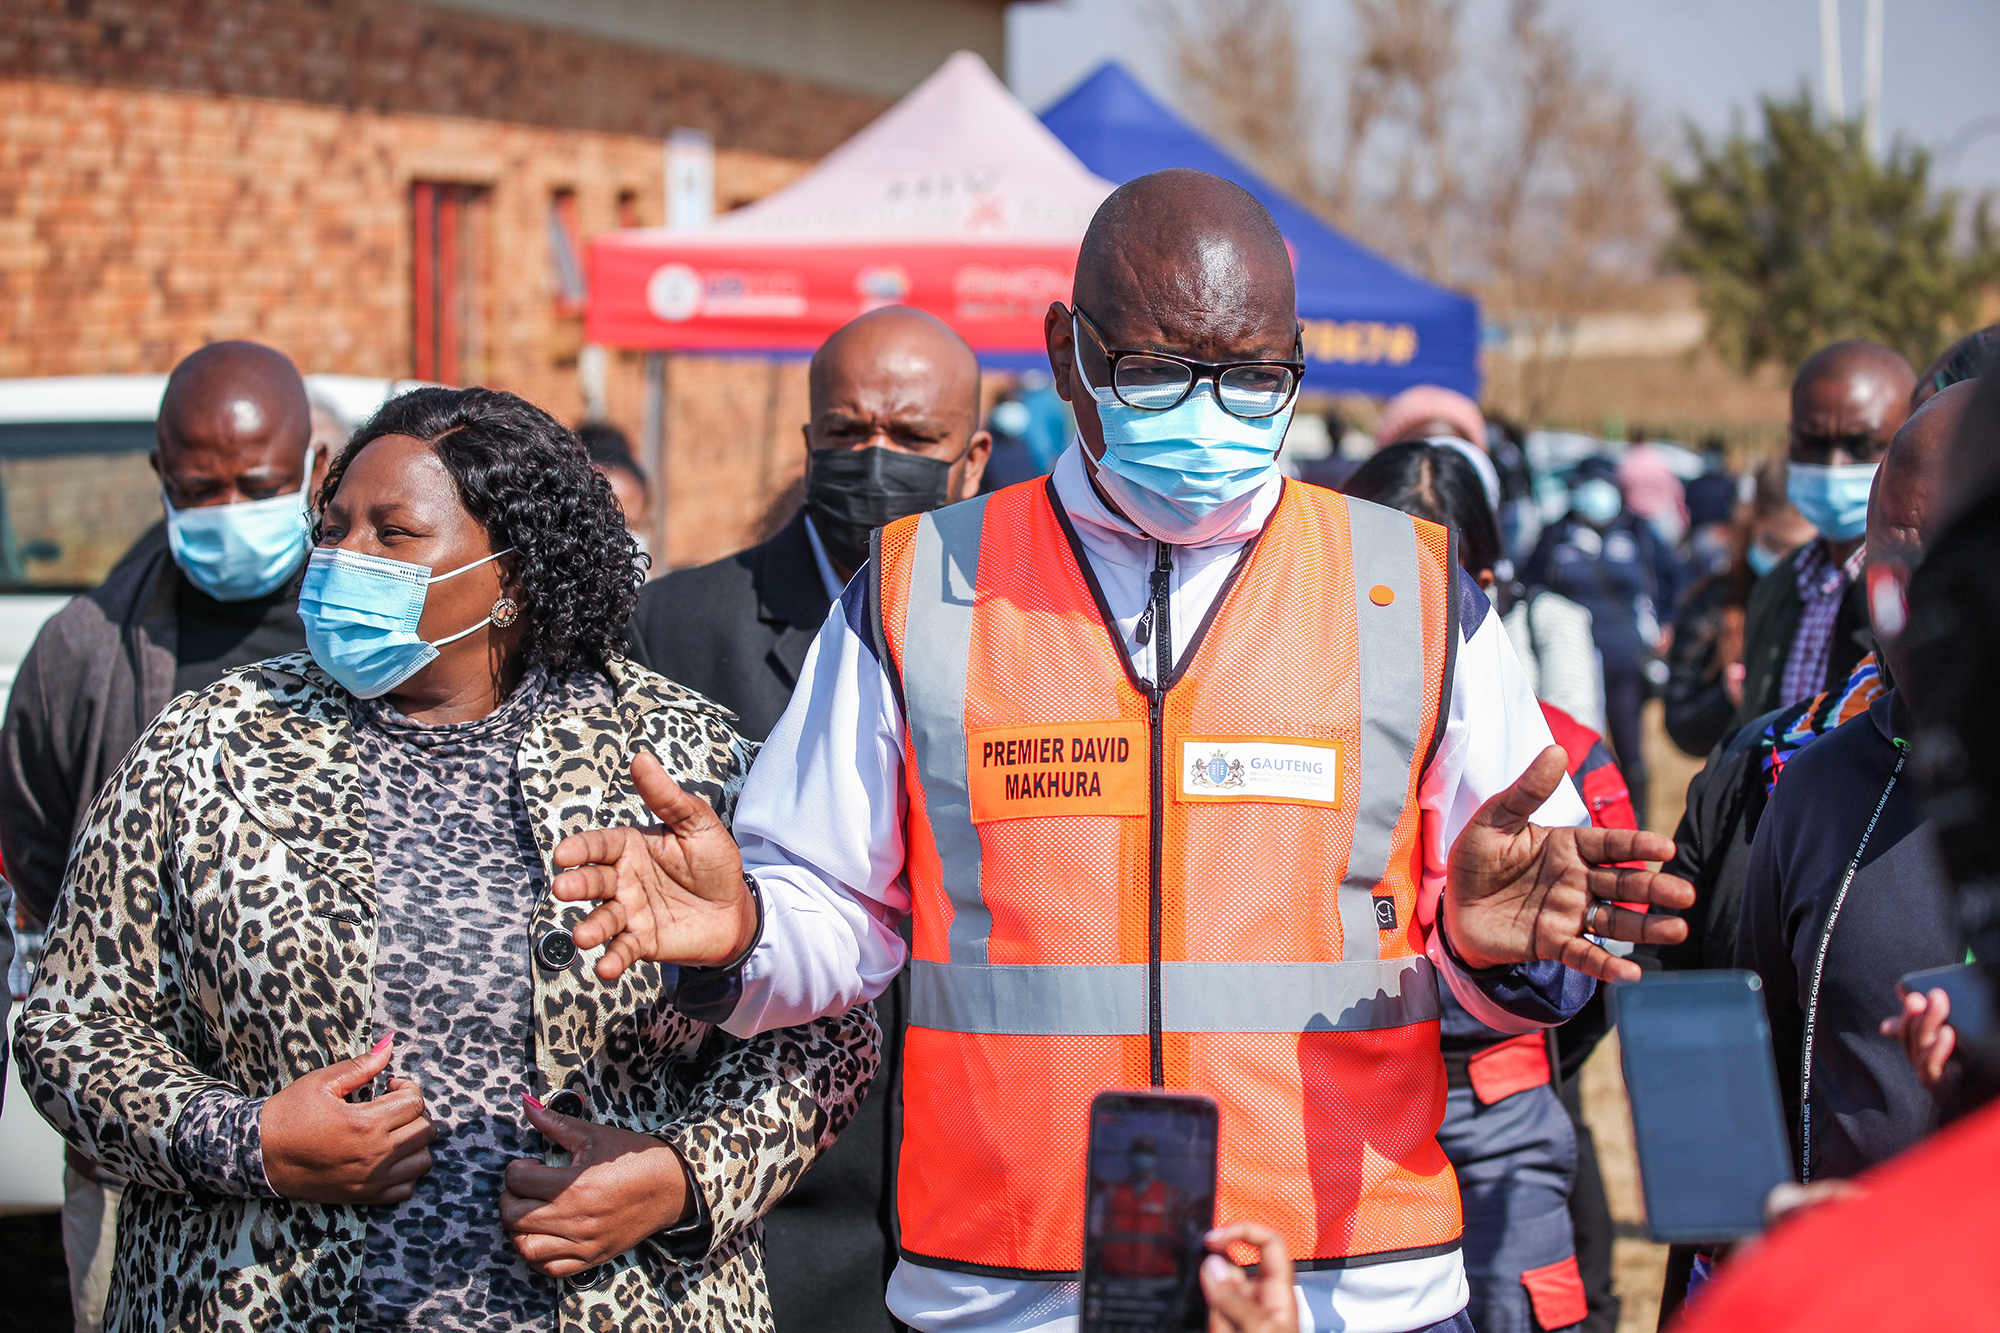 Premier David Makhura visits the Lawley Fire Station pop-up vaccination site on August 17, 2021 in Lenasia, South Africa. 